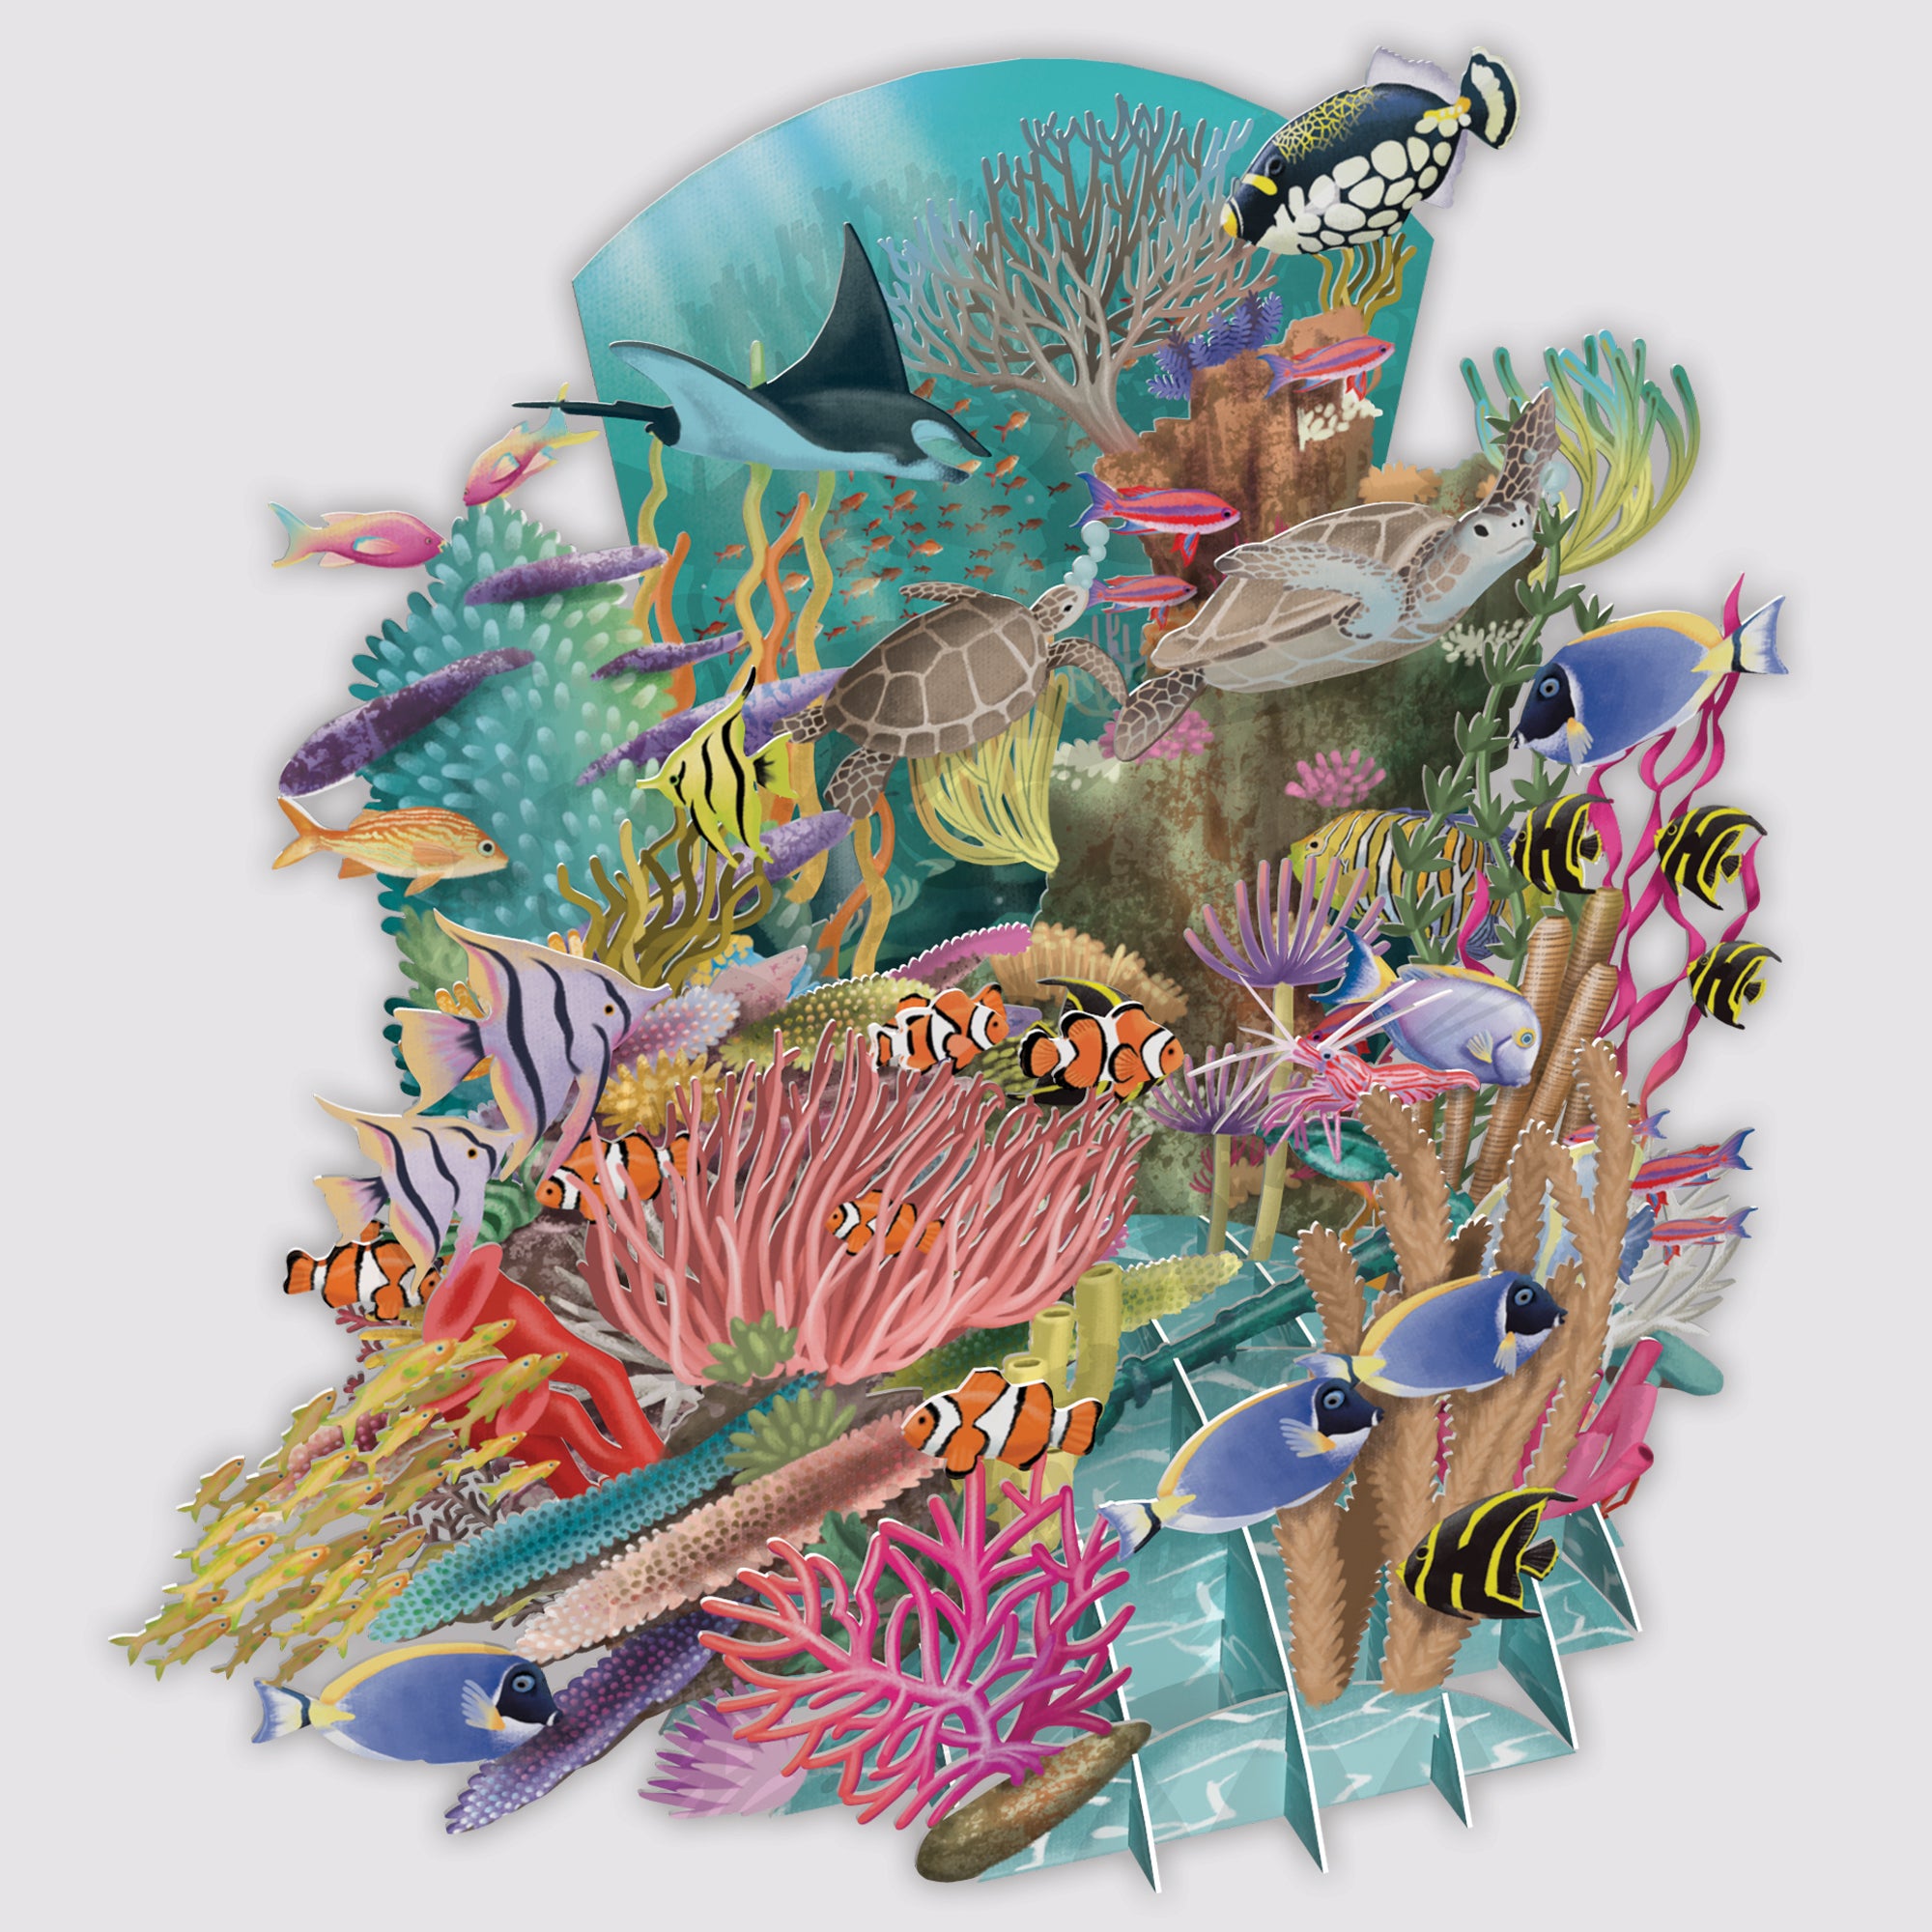 Coral Reef 3D Pop Up Greeting Card